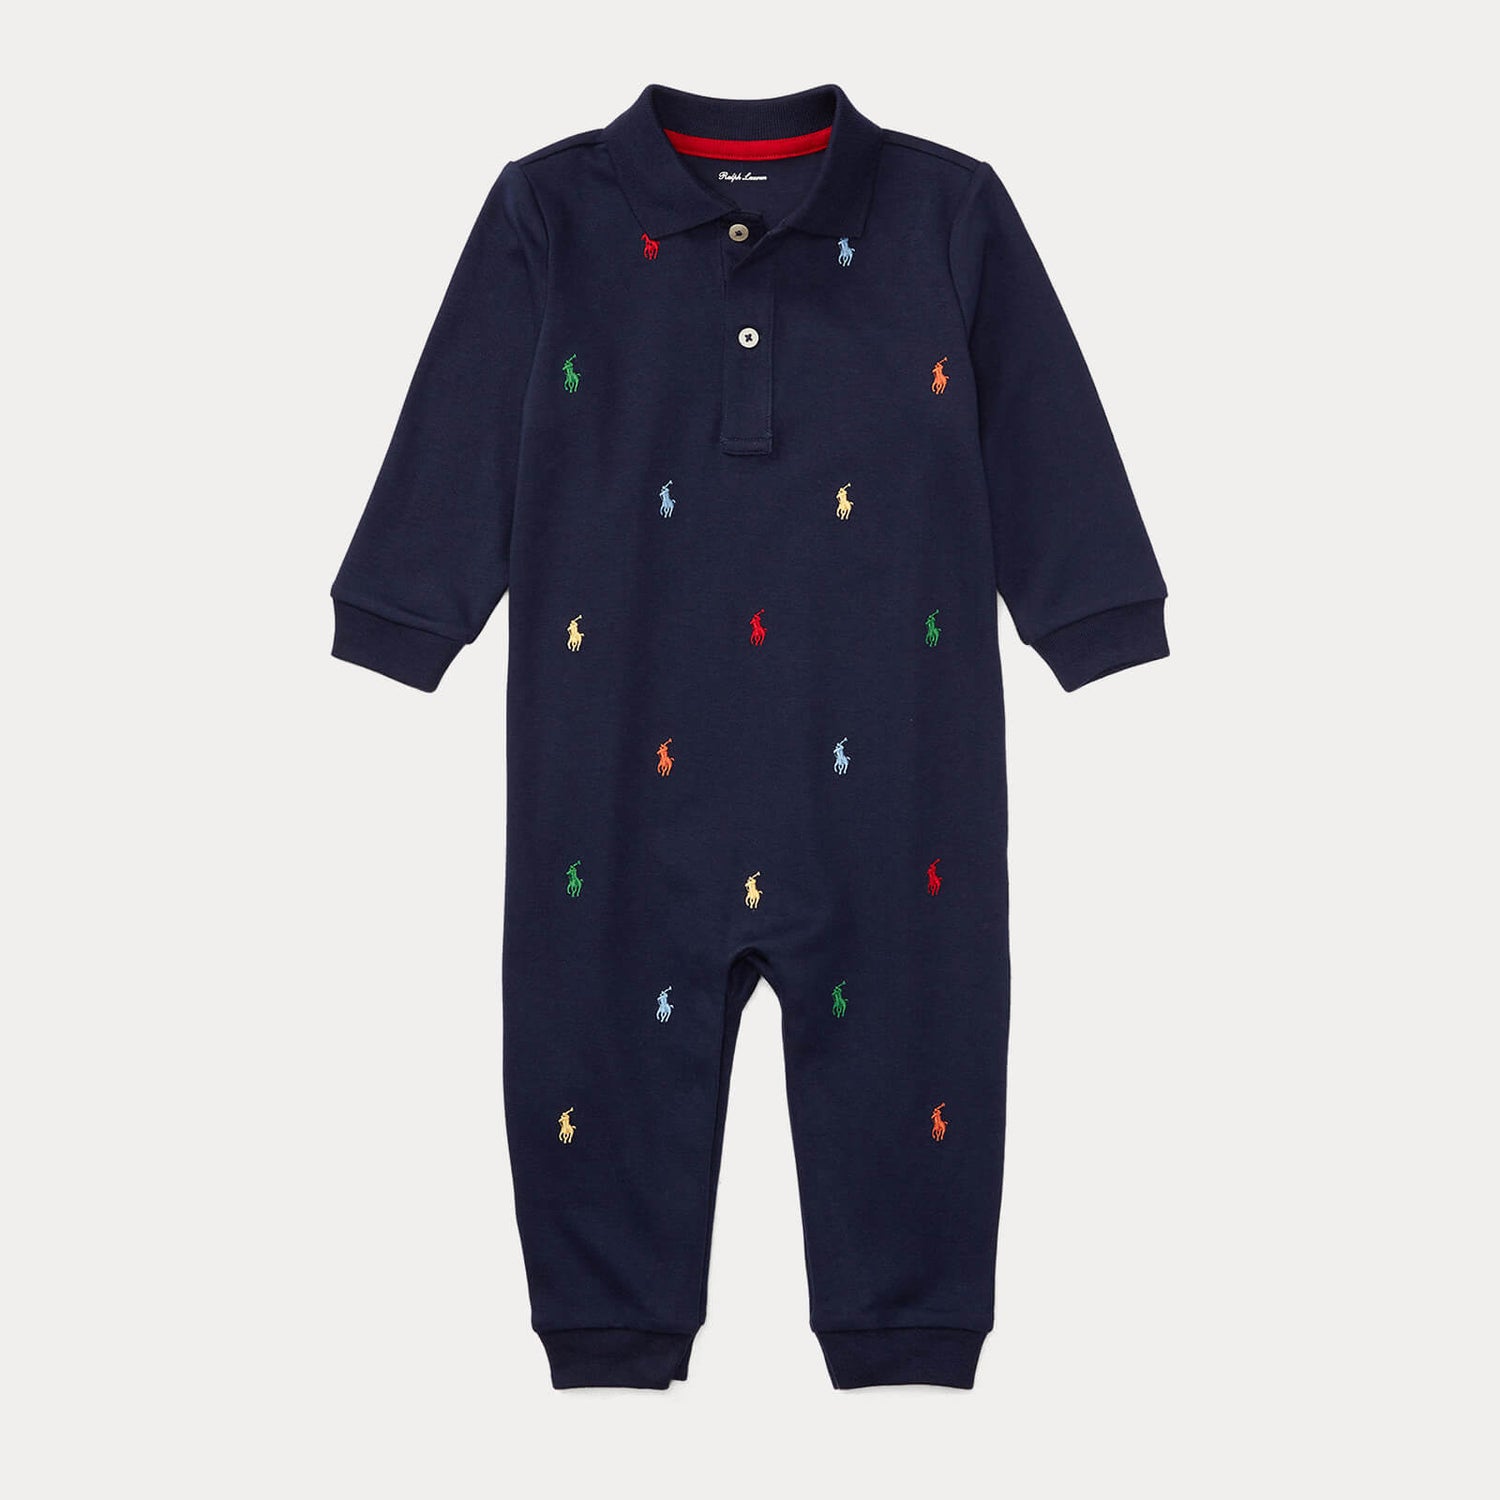 Polo Ralph Lauren Babys' Horse Print Coverall - French Navy - 3-6 months